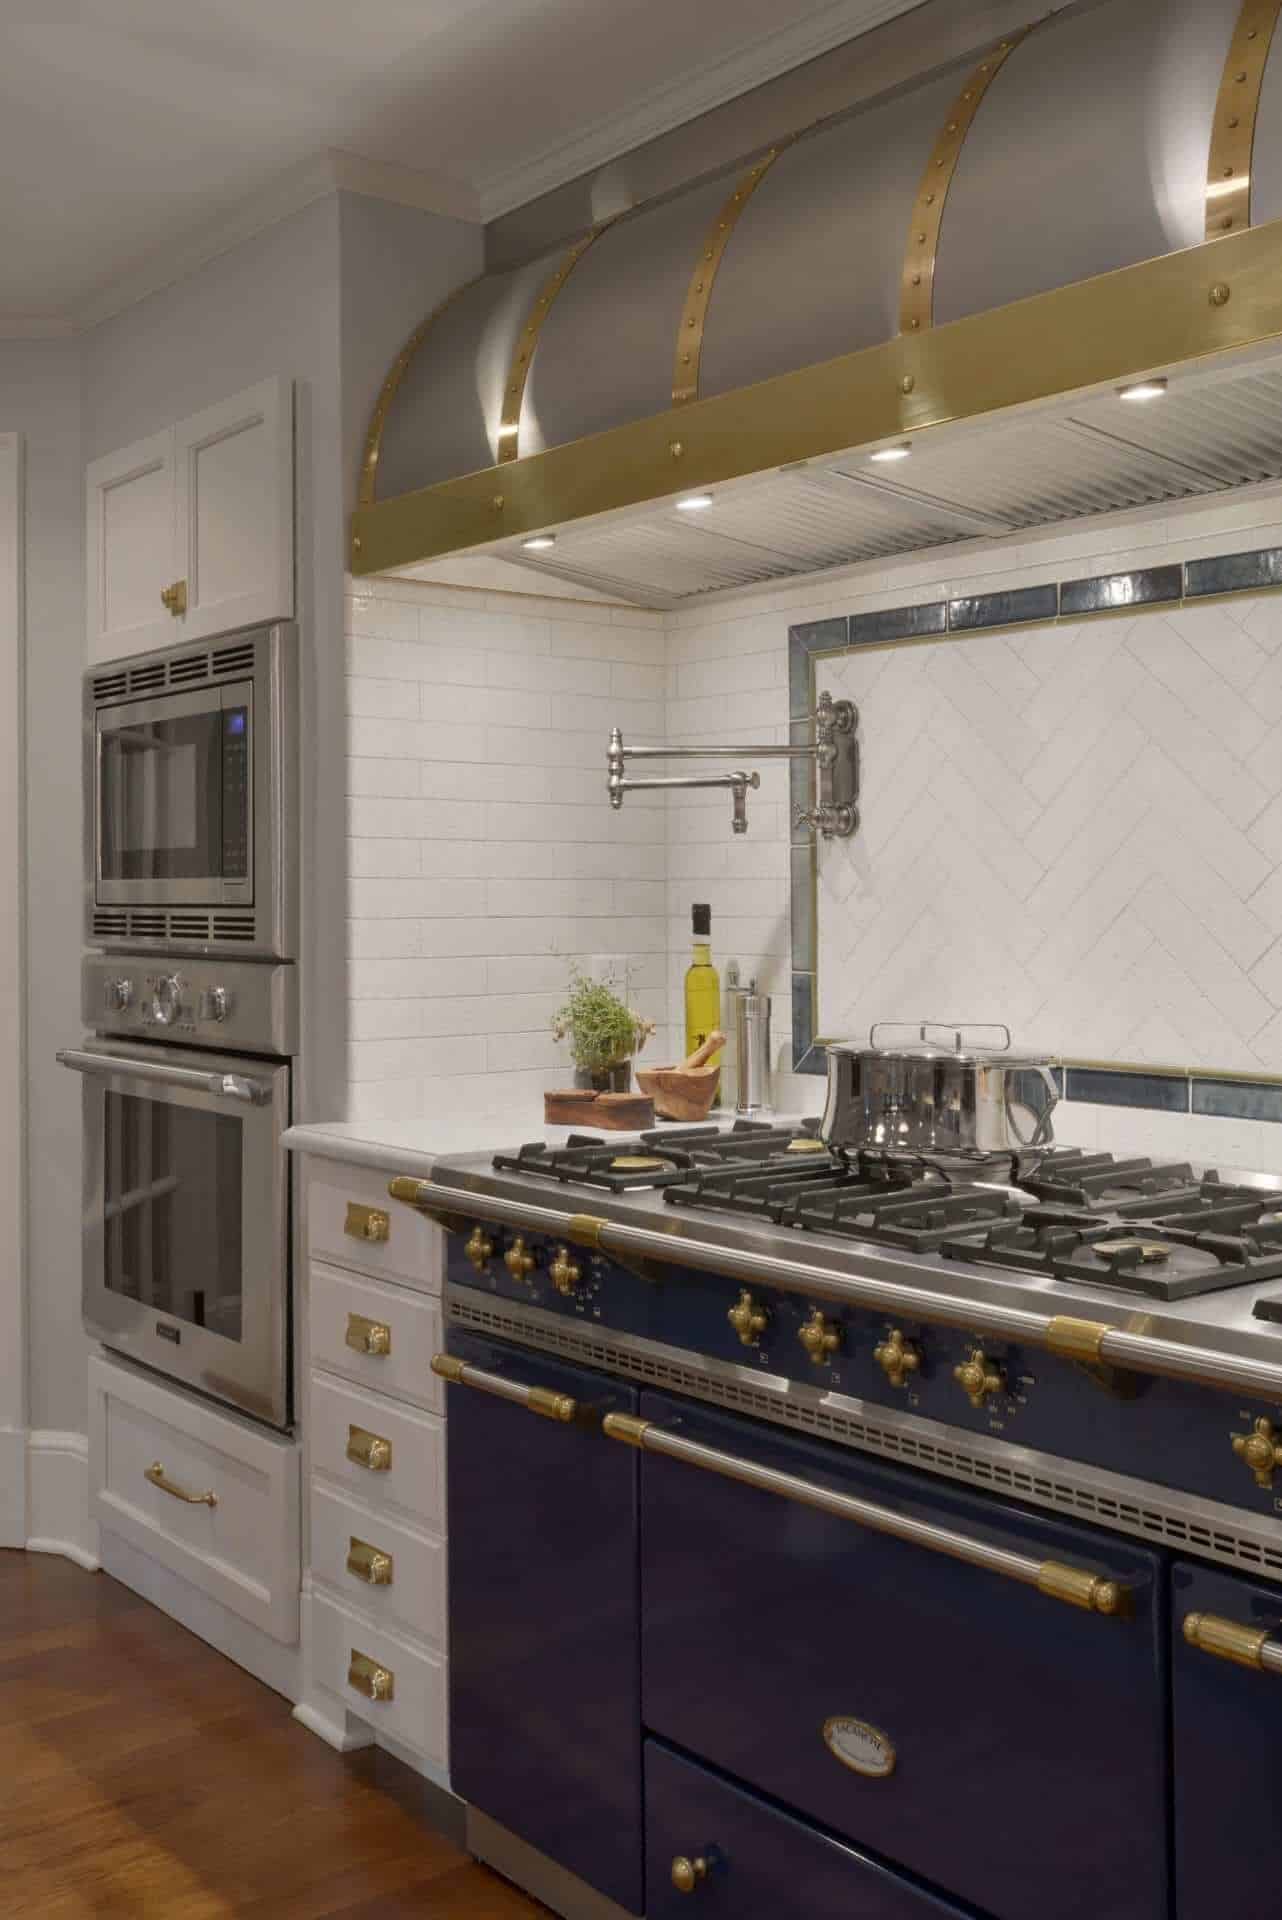 Expansive Bilotta kitchen features La Cornue range with brass accented hood and Kyoto White and Kyoto Steel backsplash by Artistic Tile.